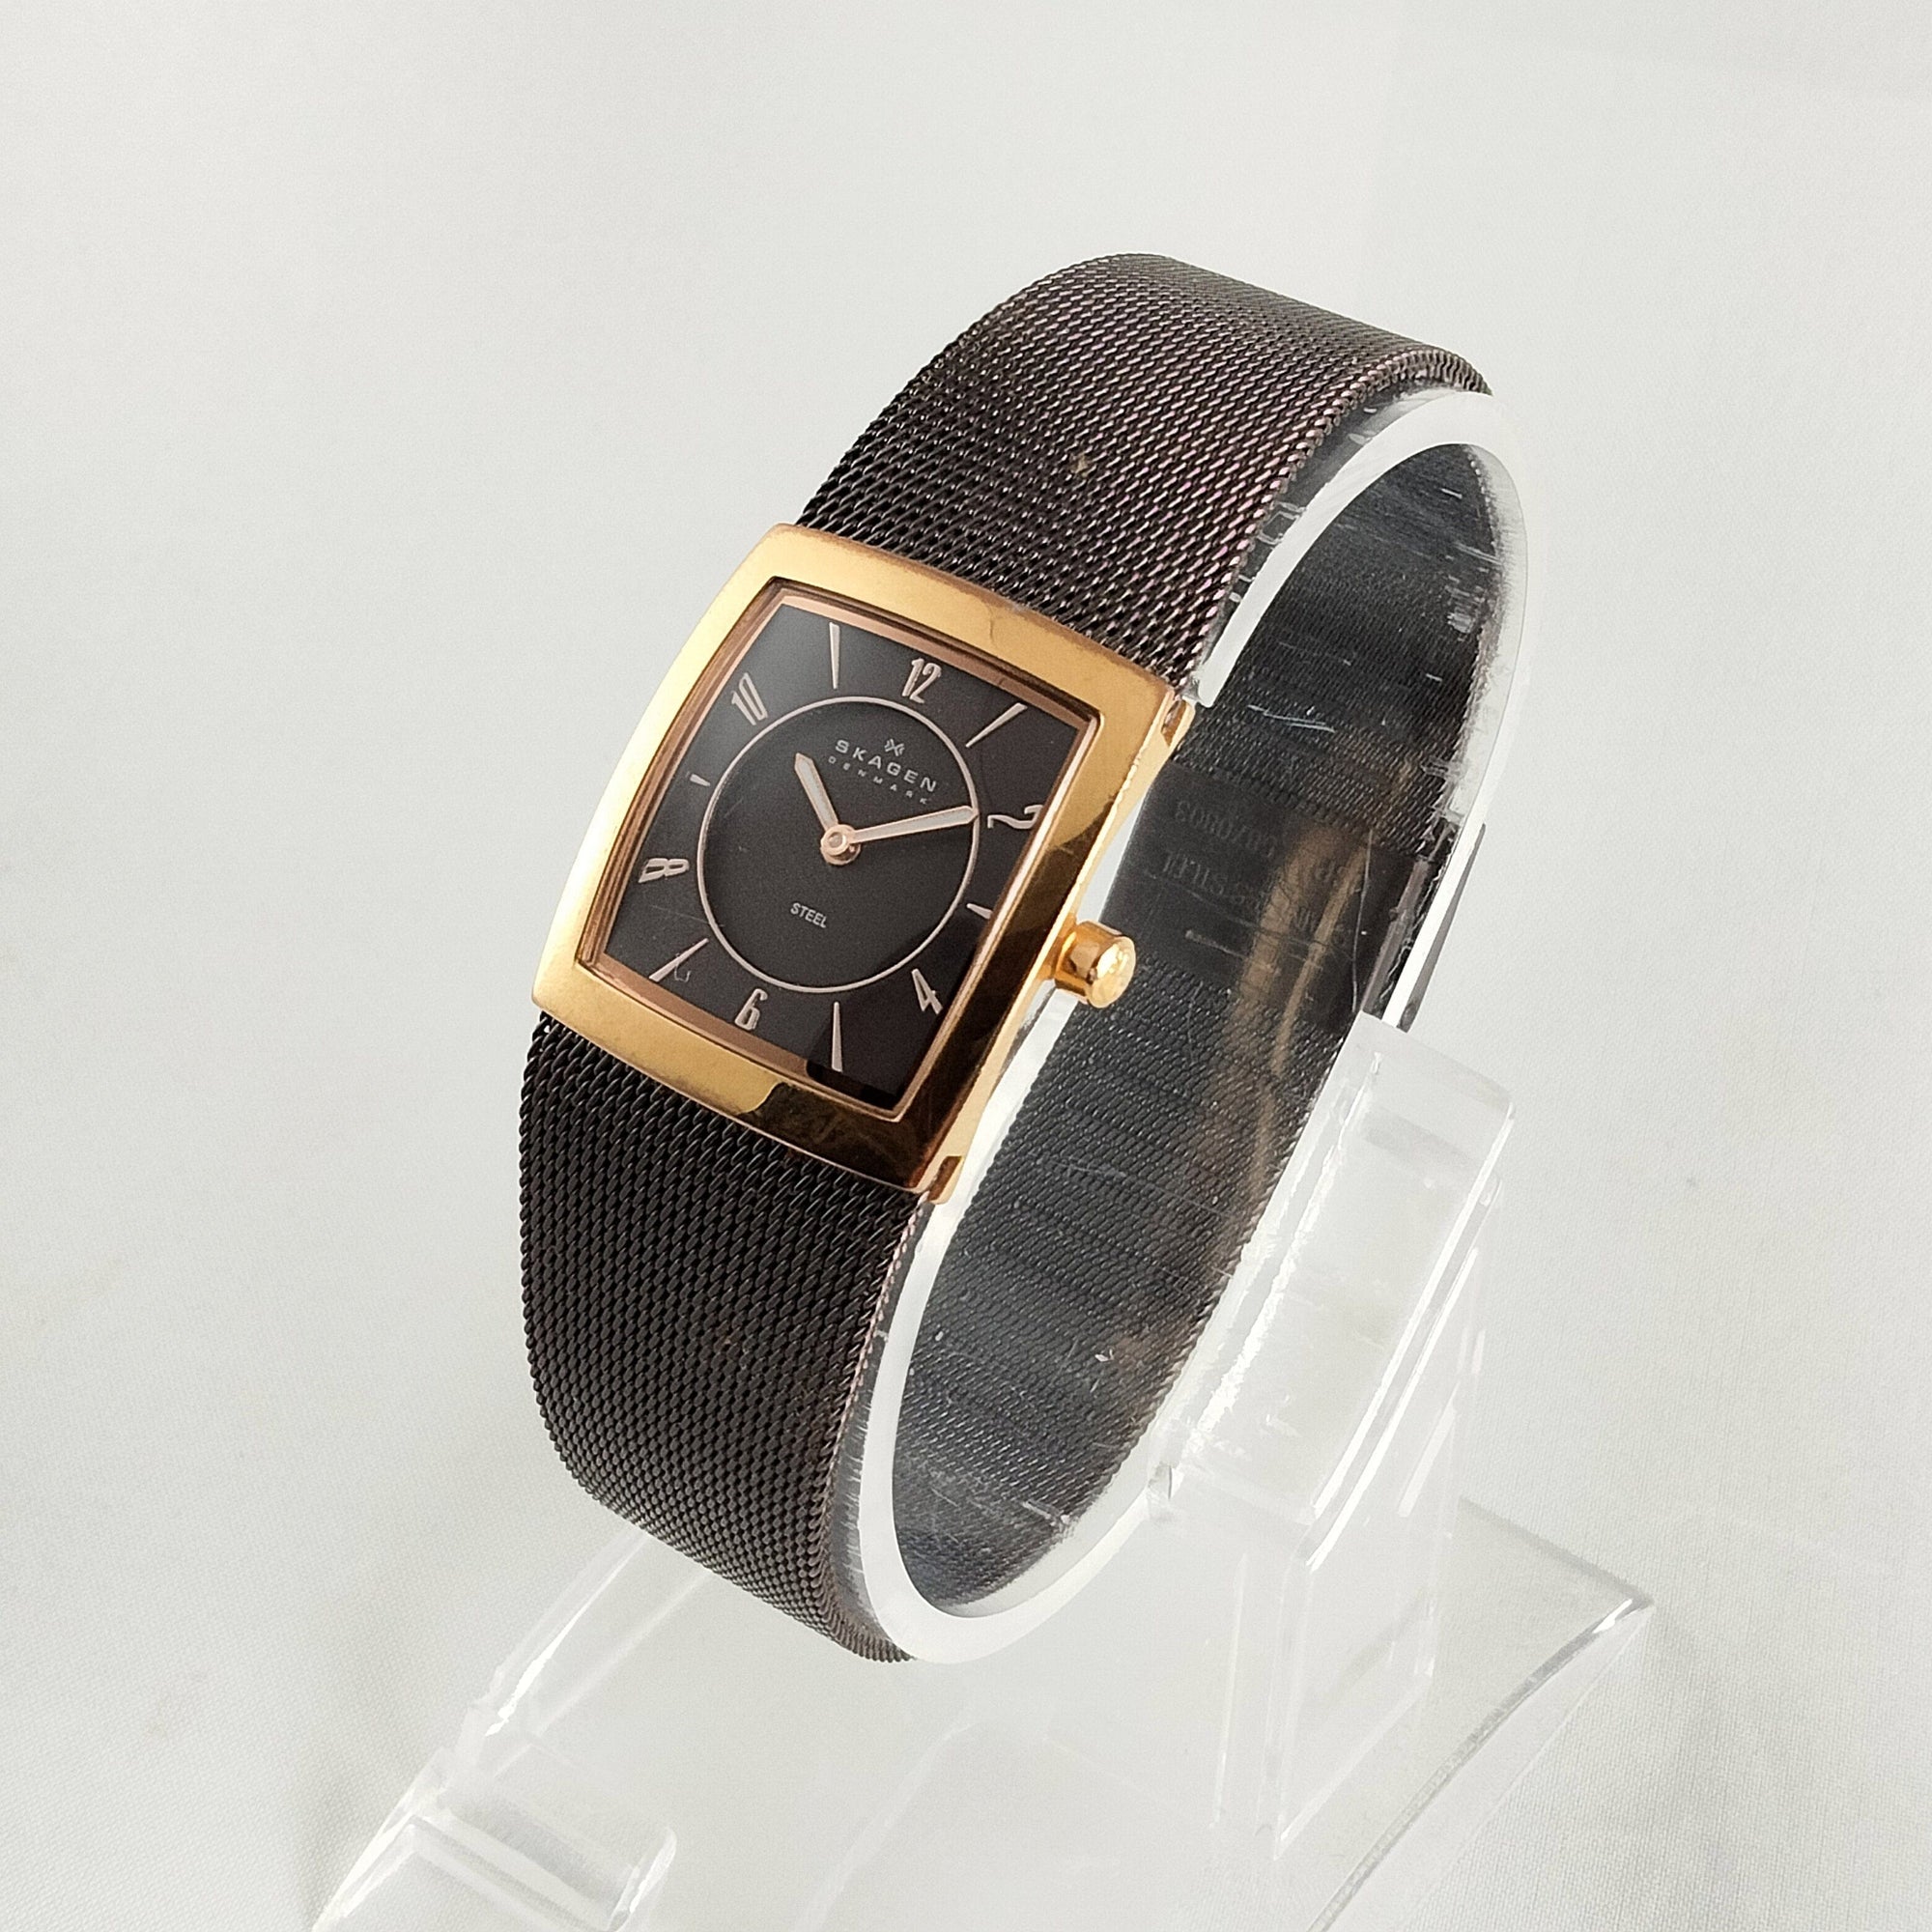 I Like Mikes Mid Century Modern Watches Skagen Unisex Stainless Steel Square Watch, Dark Brown Dial and Mesh Strap, Gold Tone Details